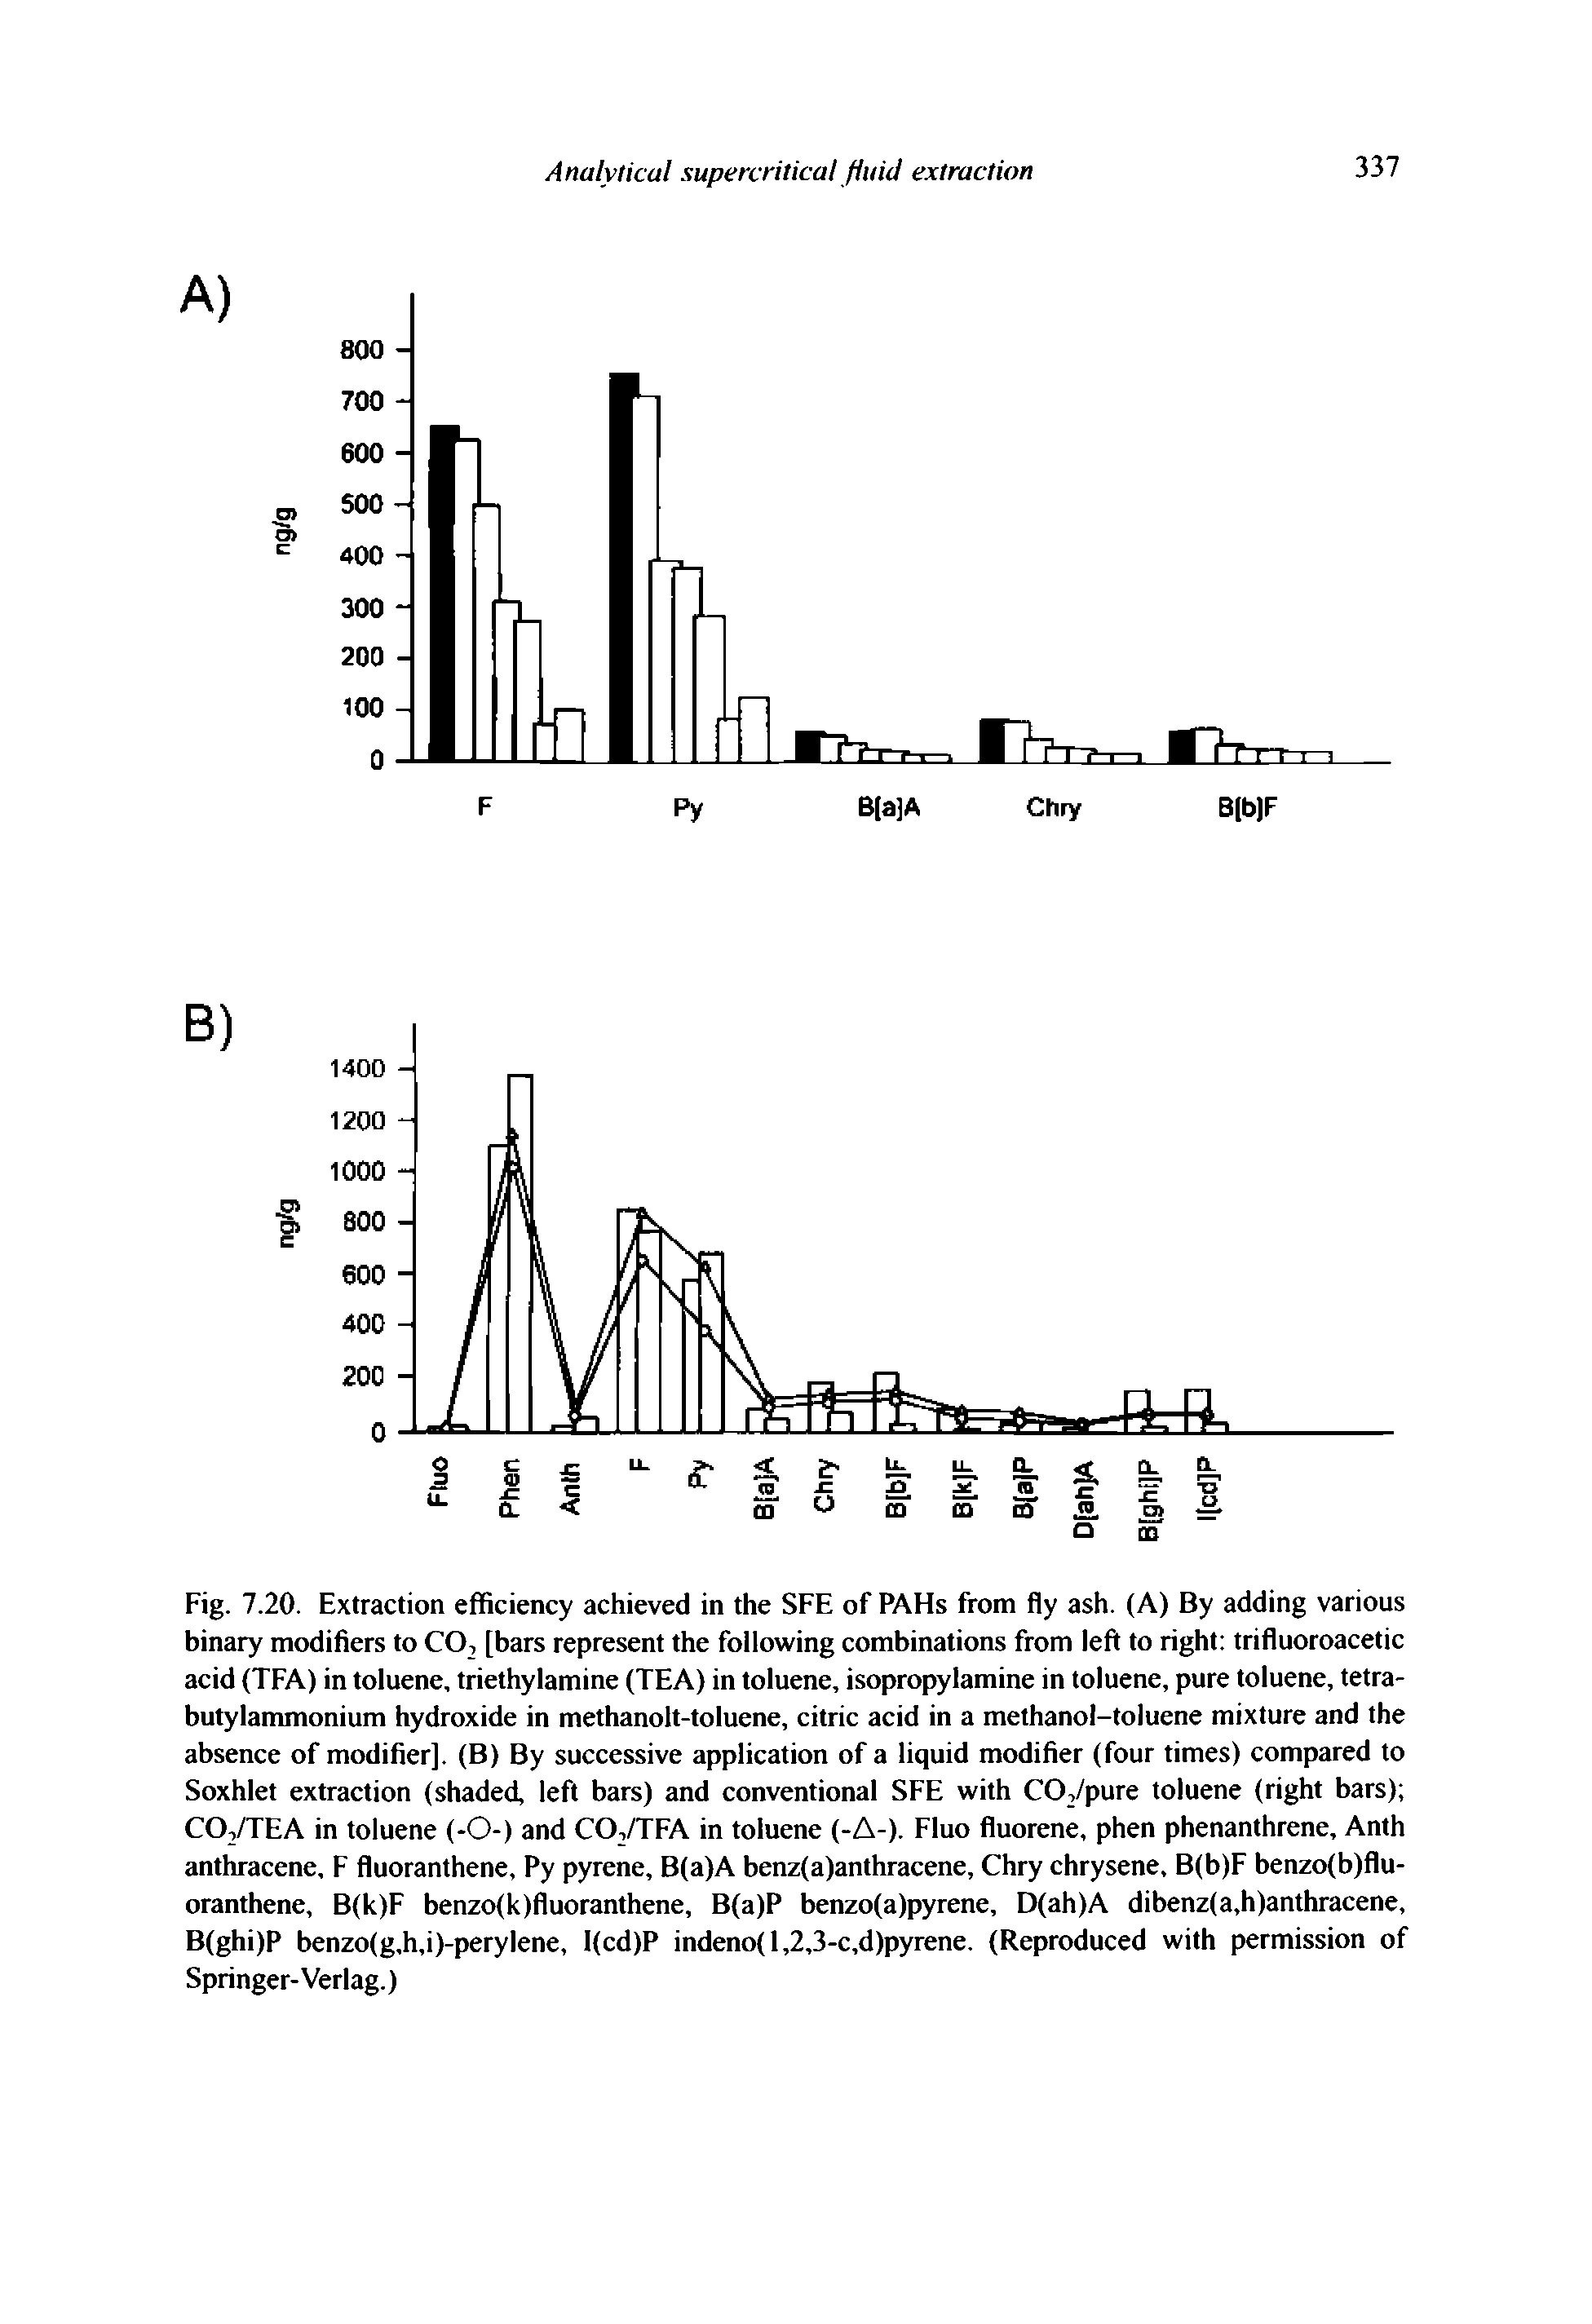 Fig. 7.20. Extraction efficiency achieved in the SFE of PAHs from fly ash. (A) By adding various binary modifiers to CO, [bars represent the following combinations from left to right trifluoroacetic acid (TFA) in toluene, triethylamine (TEA) in toluene, isopropylamine in toluene, pure toluene, tetra-butylammonium hydroxide in methanolt-toluene, citric acid in a methanol-toluene mixture and the absence of modifier]. (B) By successive application of a liquid modifier (four times) compared to Soxhiet extraction (shaded, left bars) and conventional SFE with CO,/pure toluene (right bars) CO,/TEA in toluene (-0-) and CO,/TFA in toluene (-A-). Fluo fluorene, phen phenanthrene, Anth anthracene, F fluoranthene, Py pyrene, B(a)A benz(a)anthracene, Chry chrysene, B(b)F benzo(b)flu-oranthene, B(k)F benzo(k)fluoranthene, B(a)P benzo(a)pyrene, D(ah)A dibenz(a,h)anthracene, B(ghi)P benzo(g,h,i)-perylene, I(cd)P indeno(l,2,3-c,d)pyrene. (Reproduced with permission of Springer-Verlag.)...